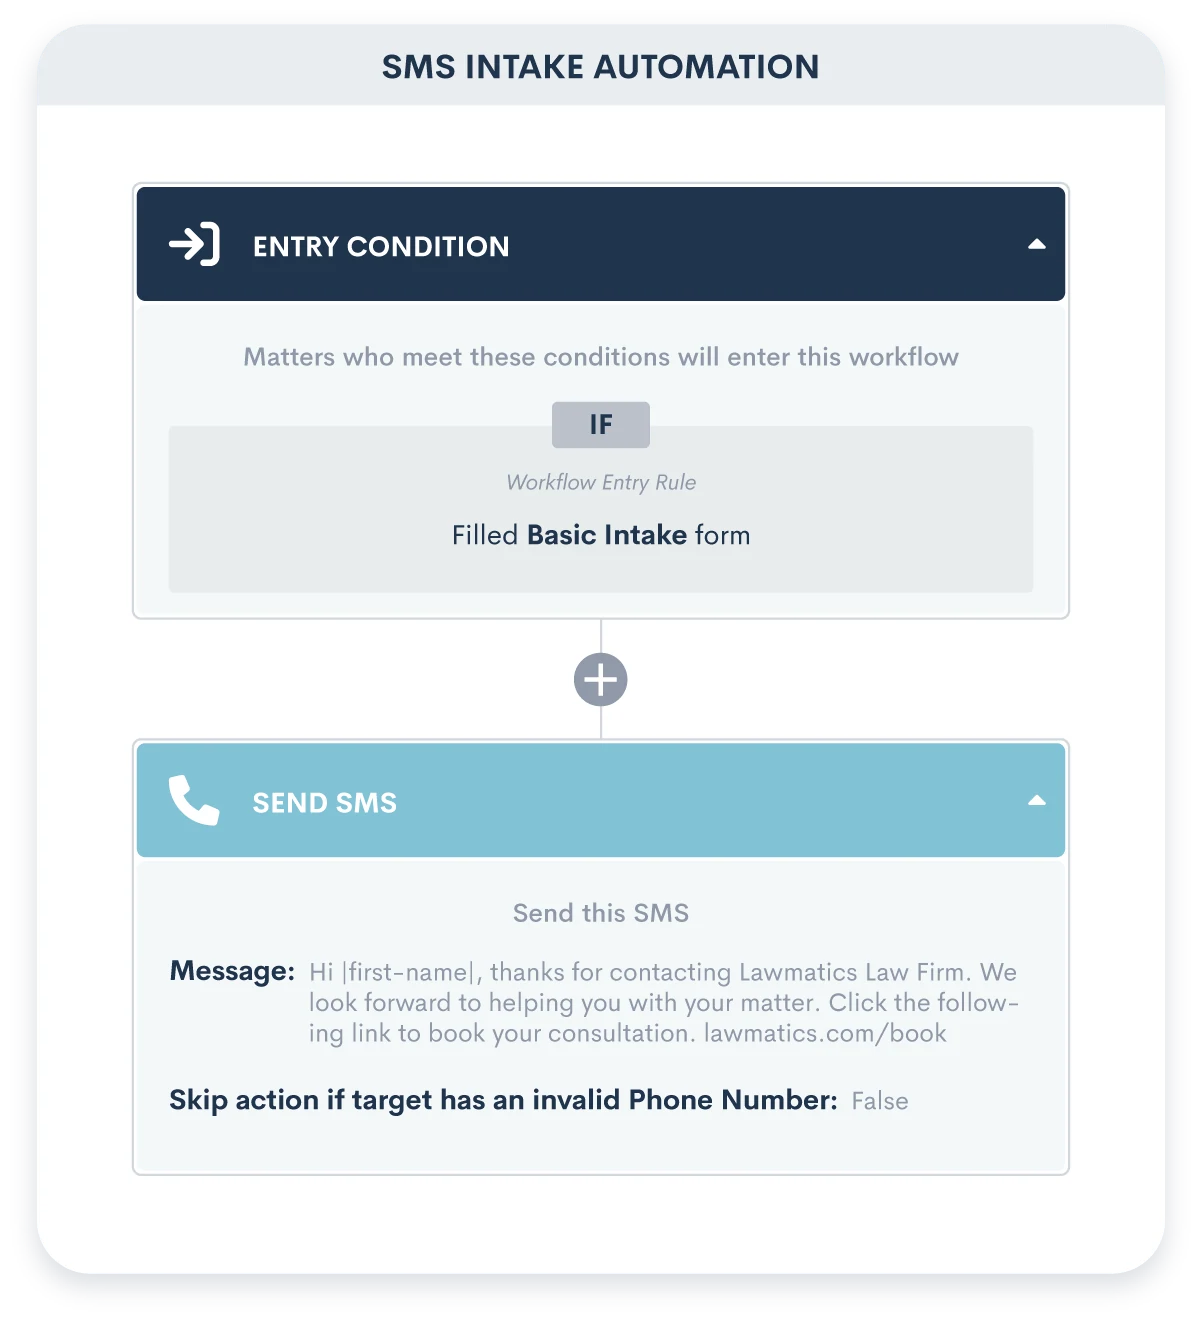 SMS Intake Automation